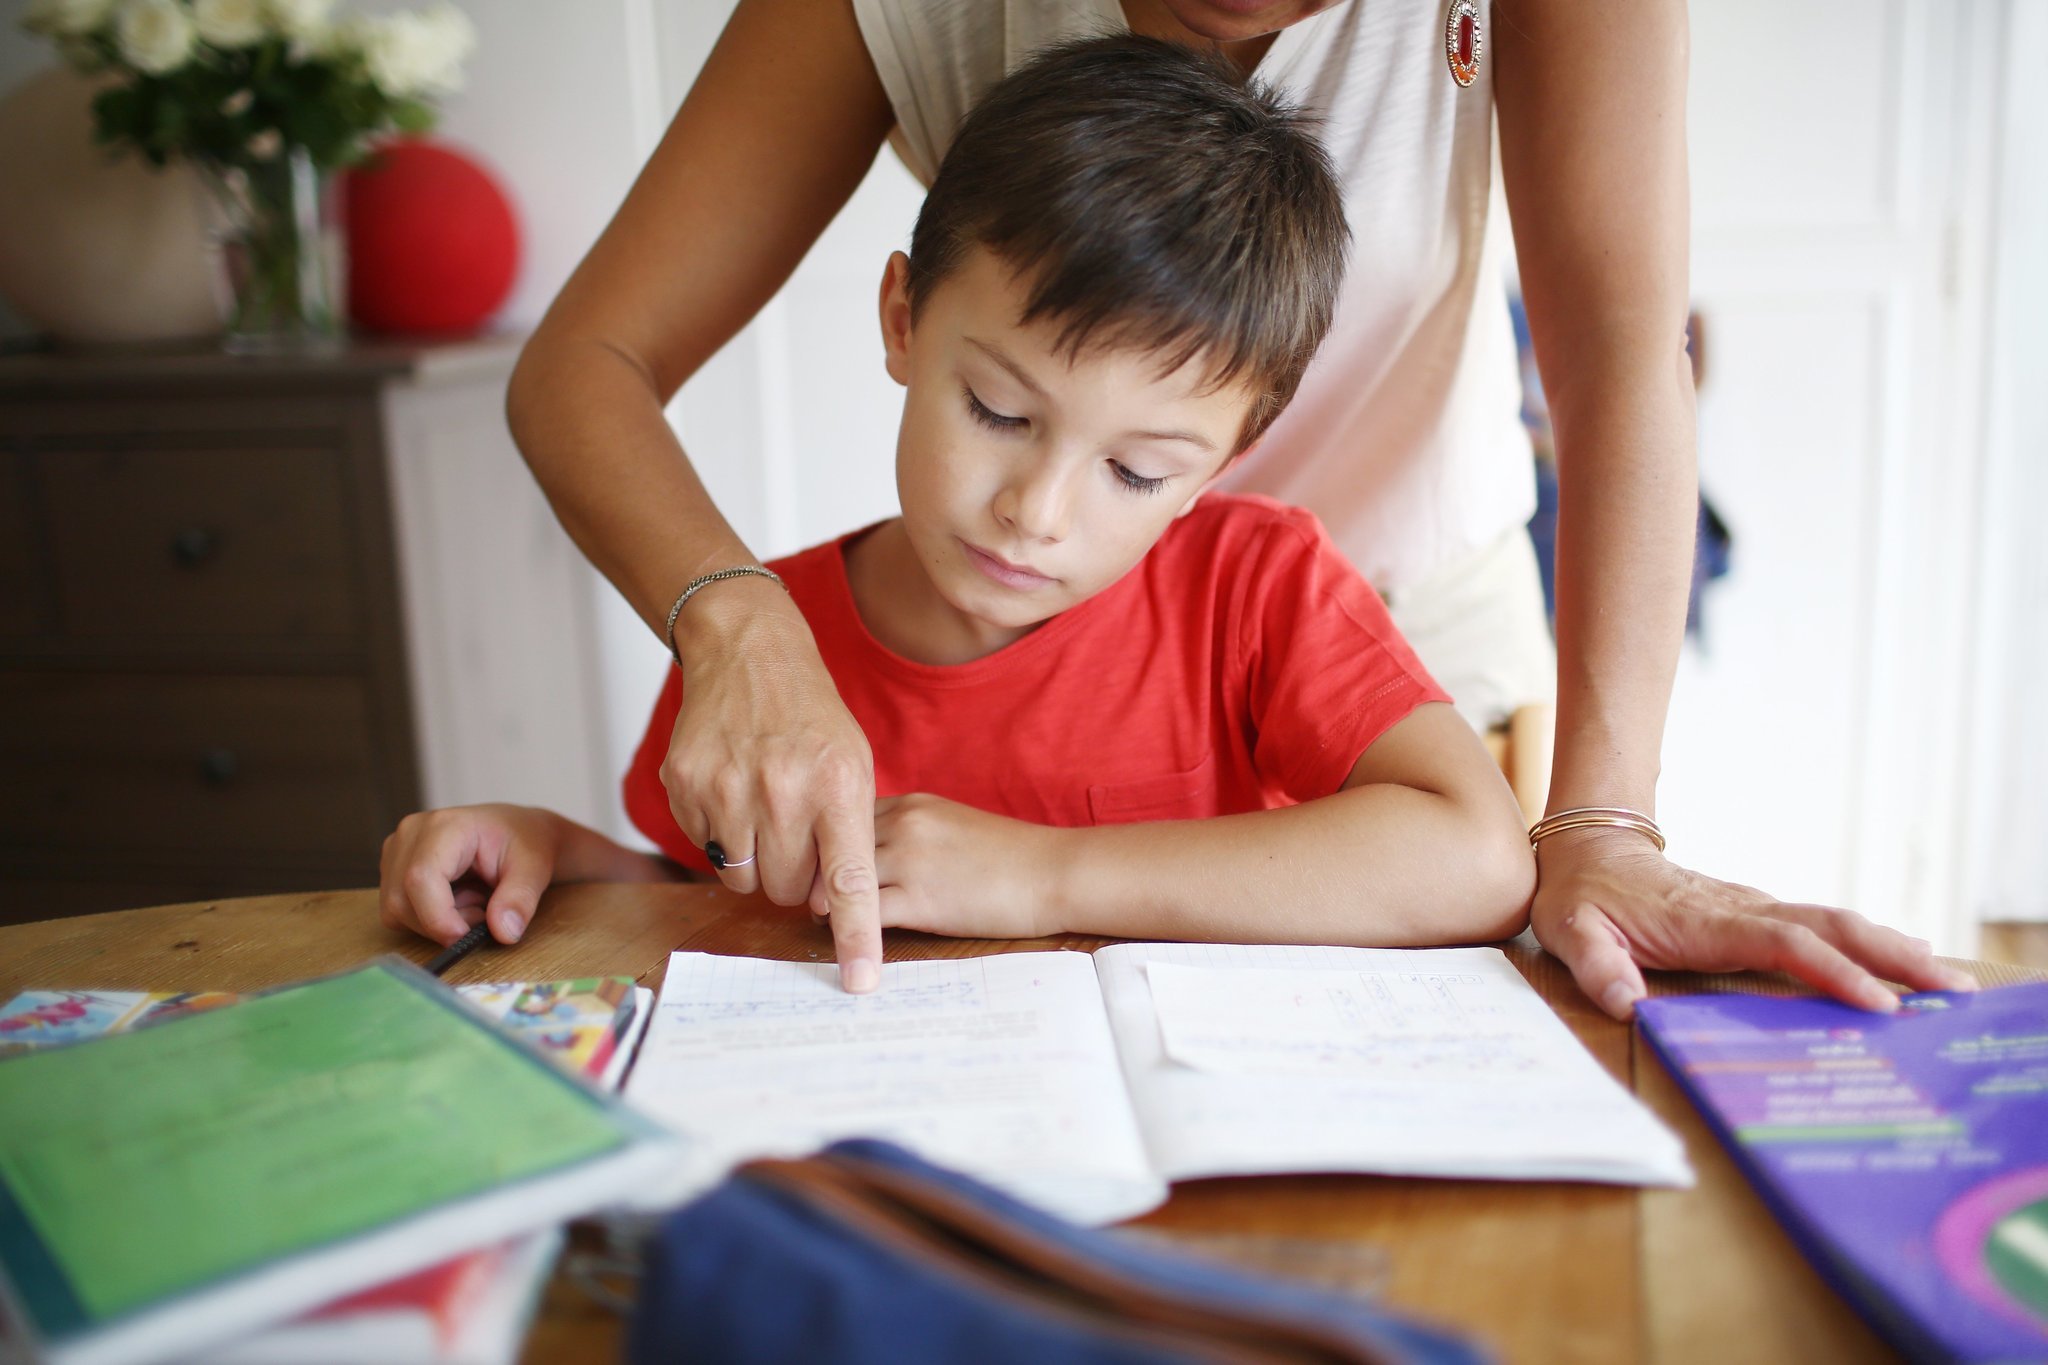 Is Homework Beneficial? - Top 3 Pros and Cons - blogger.com